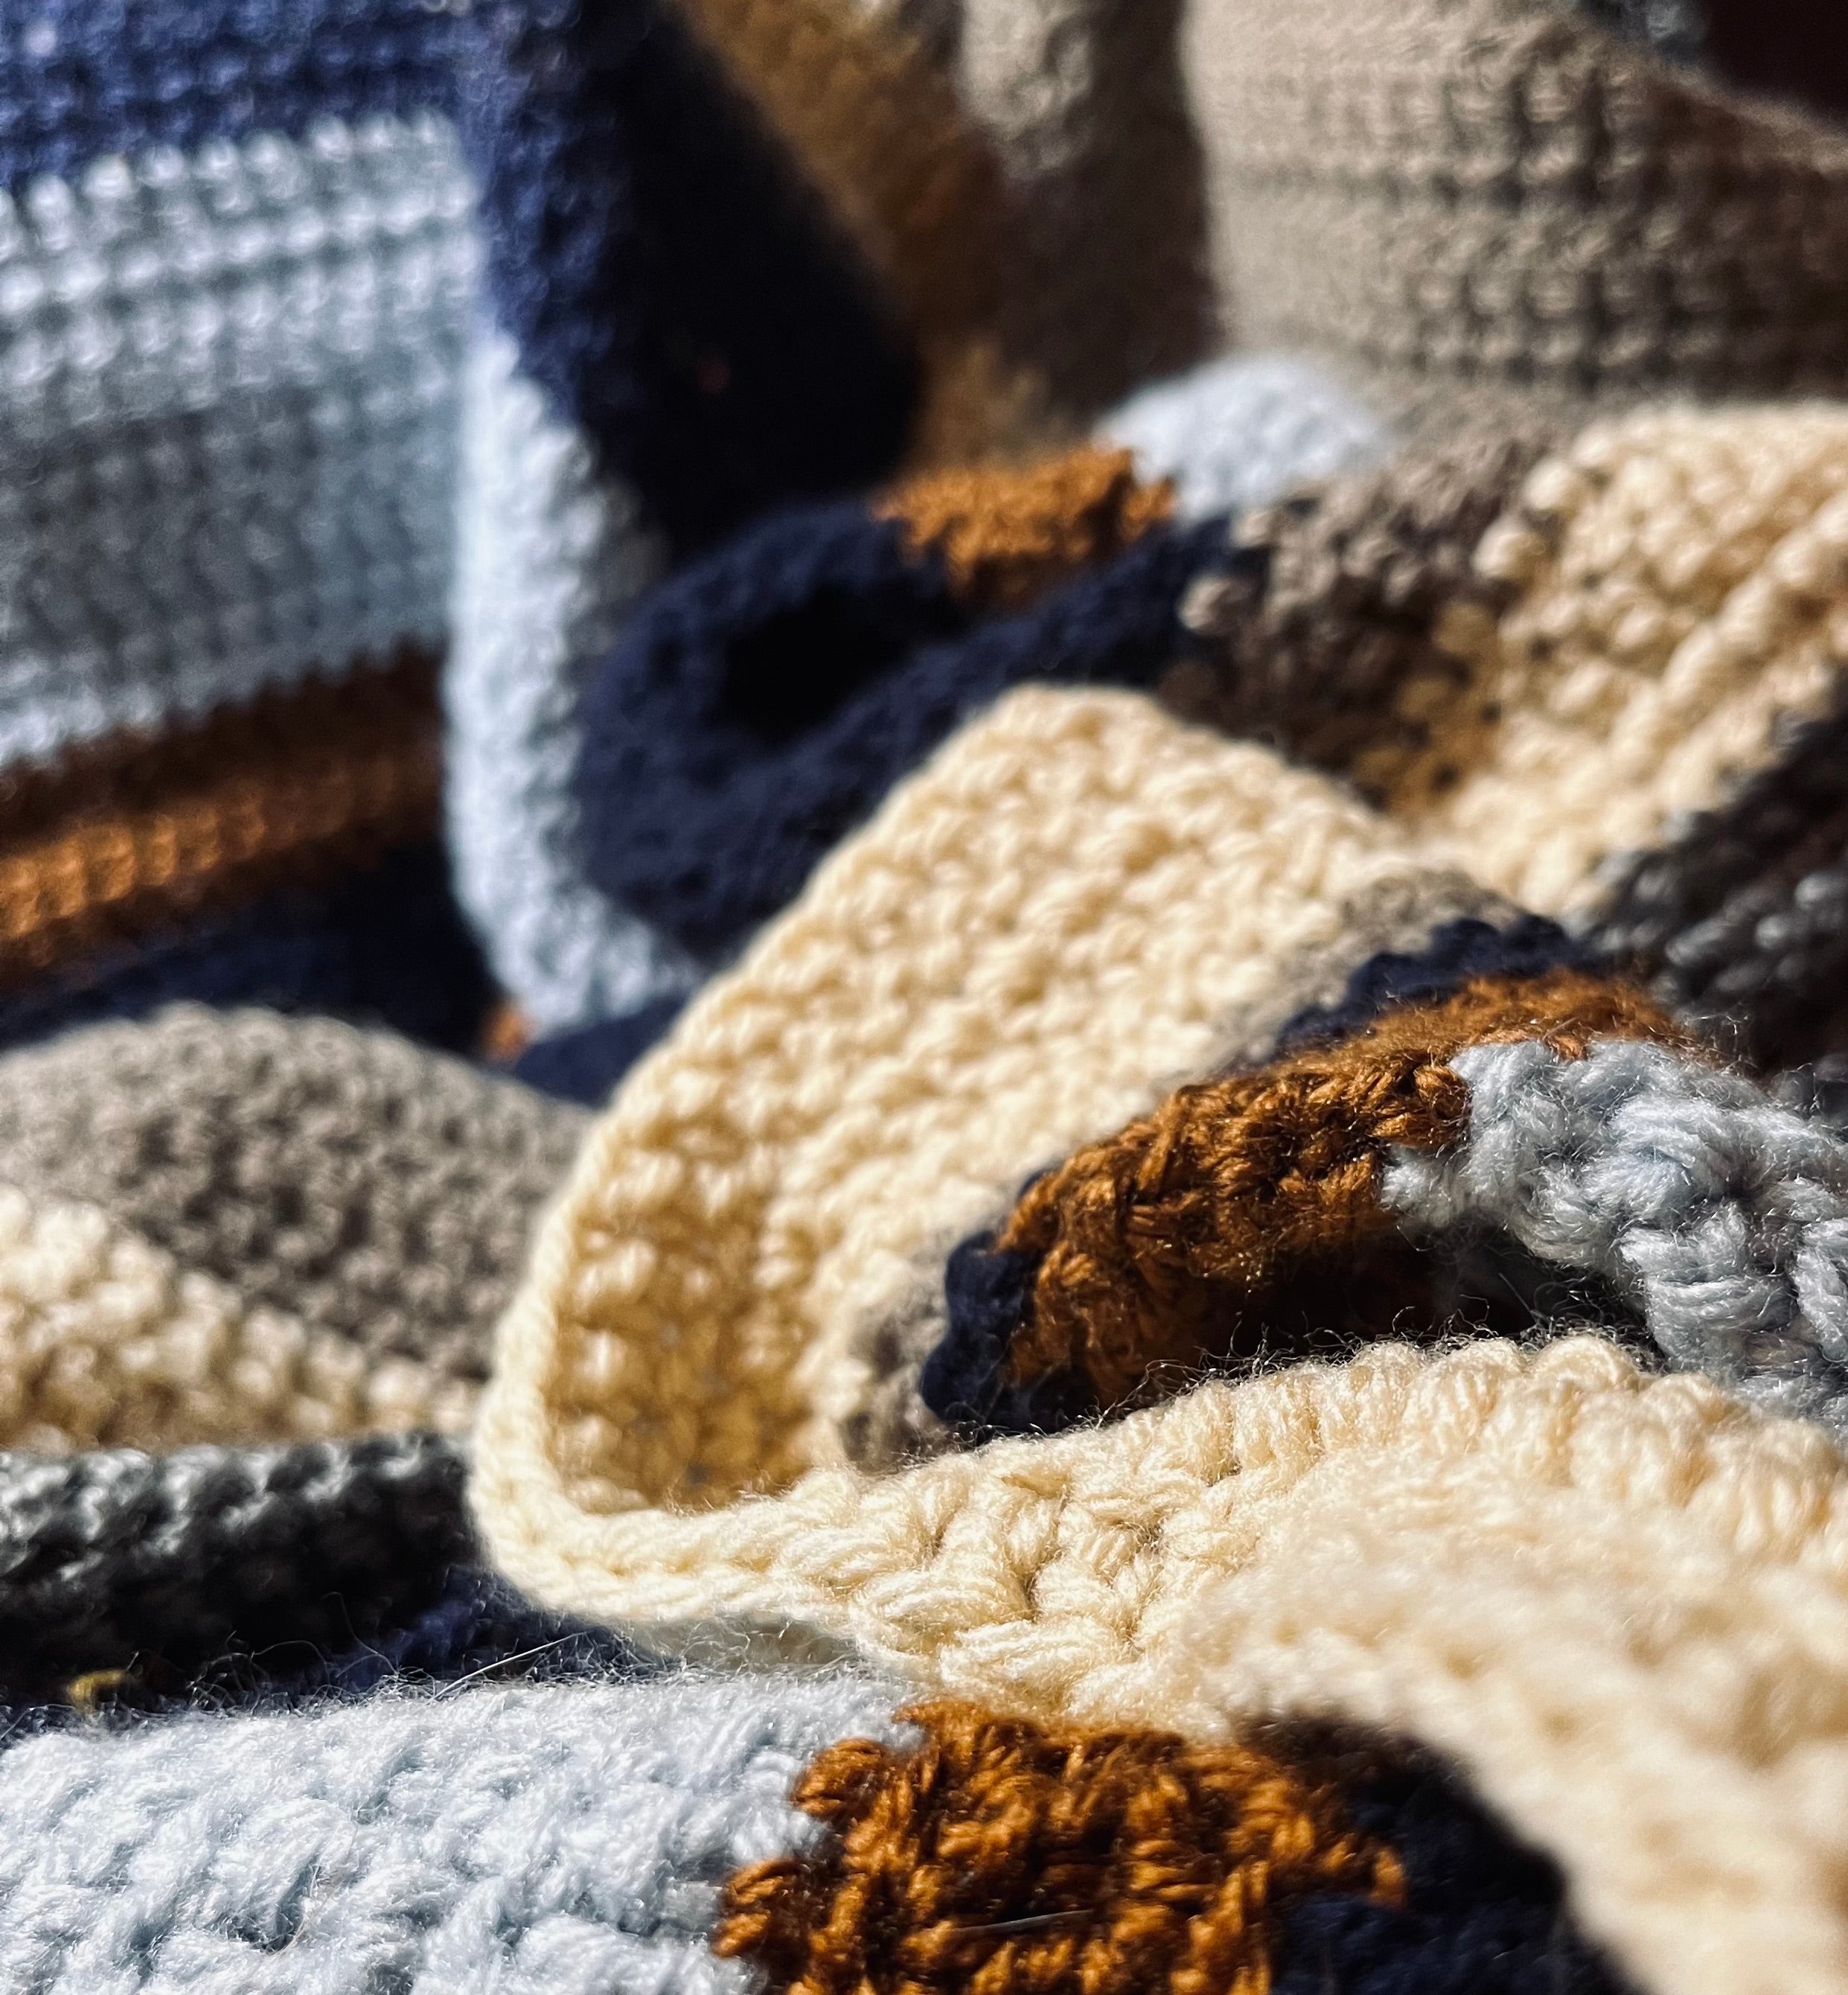 Close up photo of crochet blanket with stripes of dark blue, silver, gold, beige, tan, and light blue.